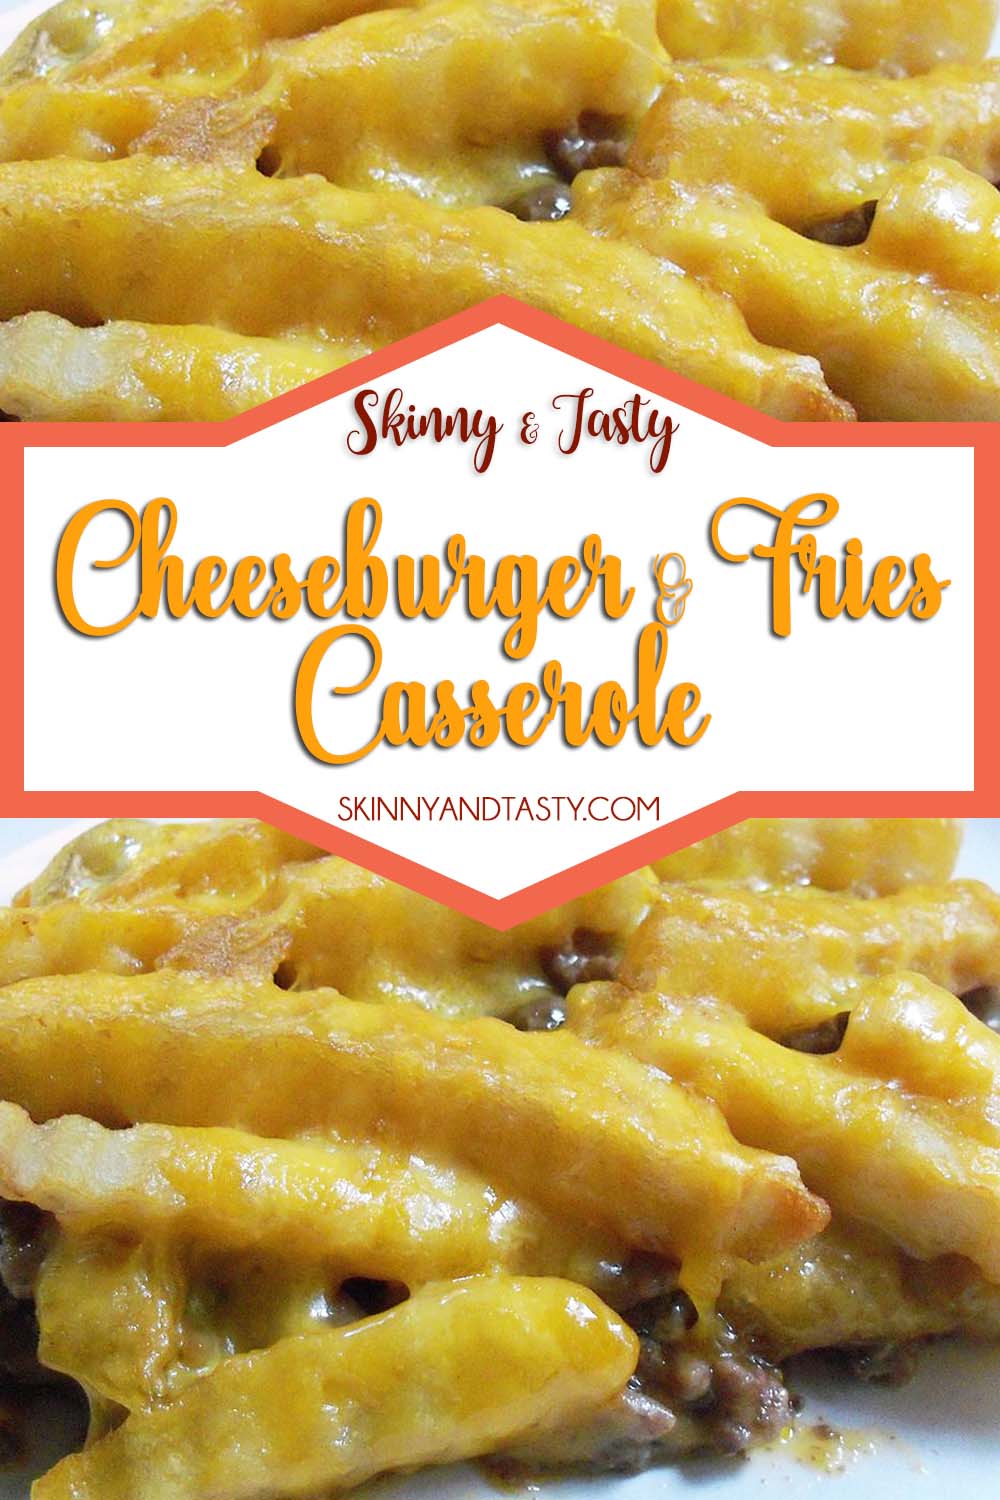 Cheeseburger and Fries Casserole